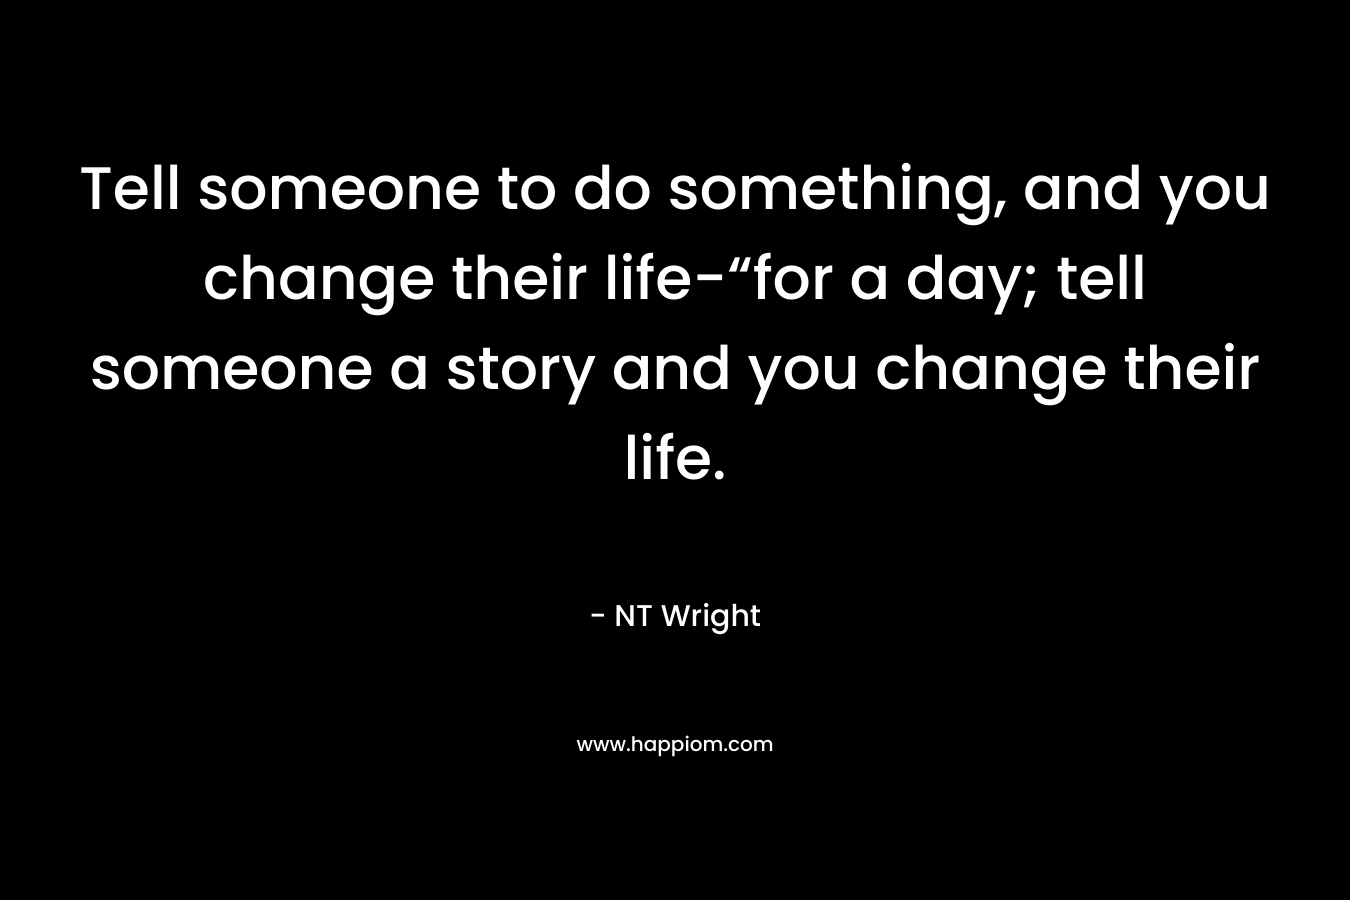 Tell someone to do something, and you change their life-“for a day; tell someone a story and you change their life.